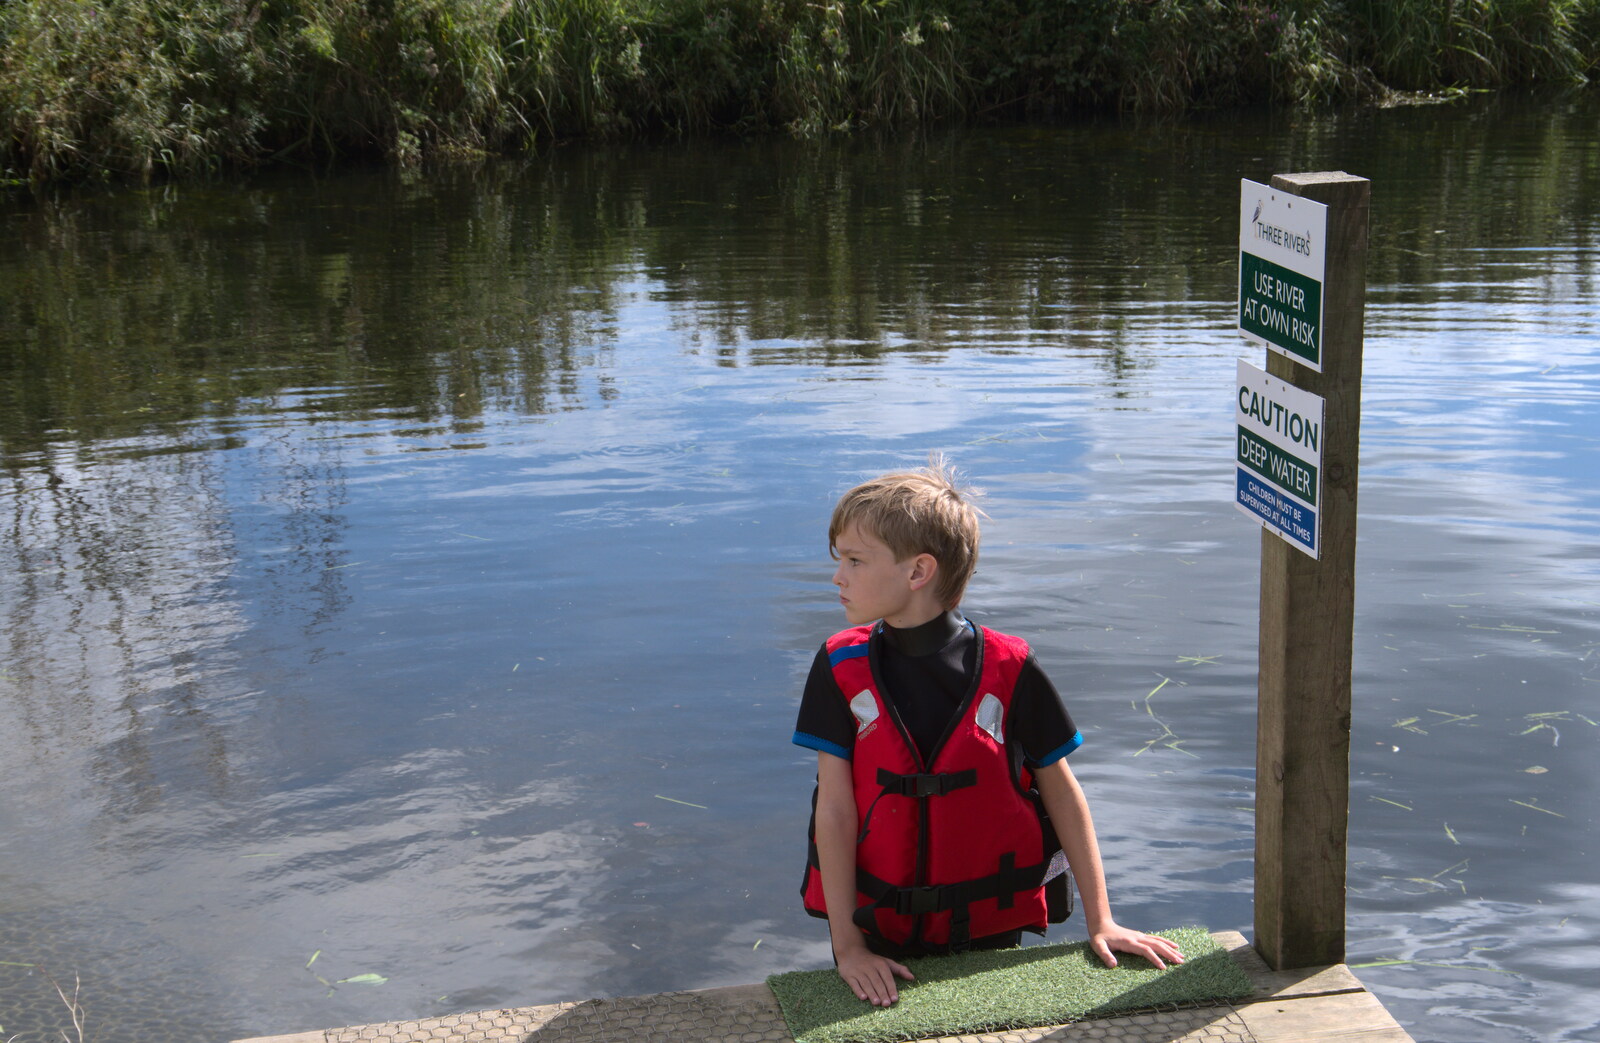 Camping at Three Rivers, Geldeston, Norfolk - 5th September 2020: Harry climbs up to the pontoon